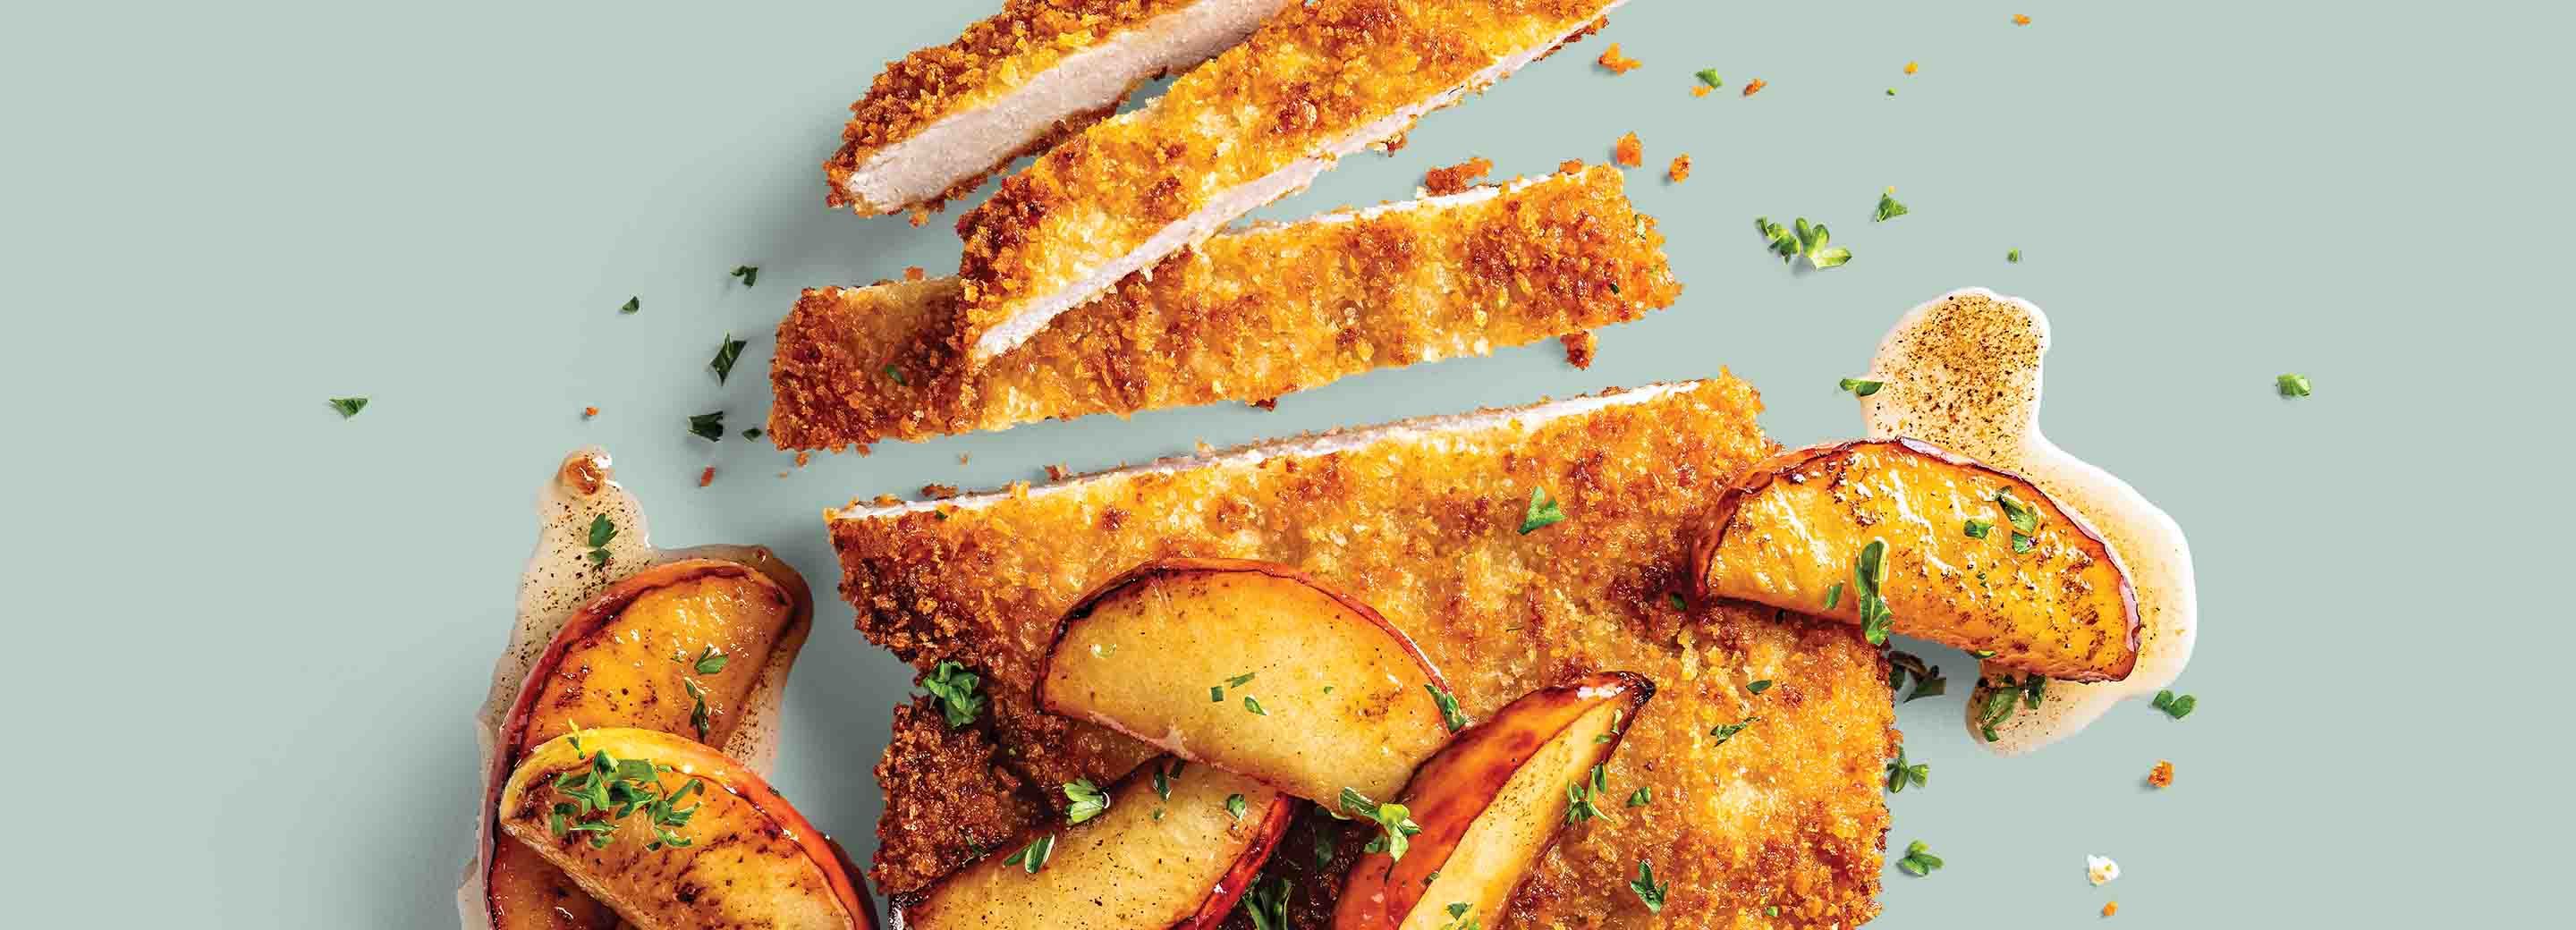 Schnitzel with Spiced Apples